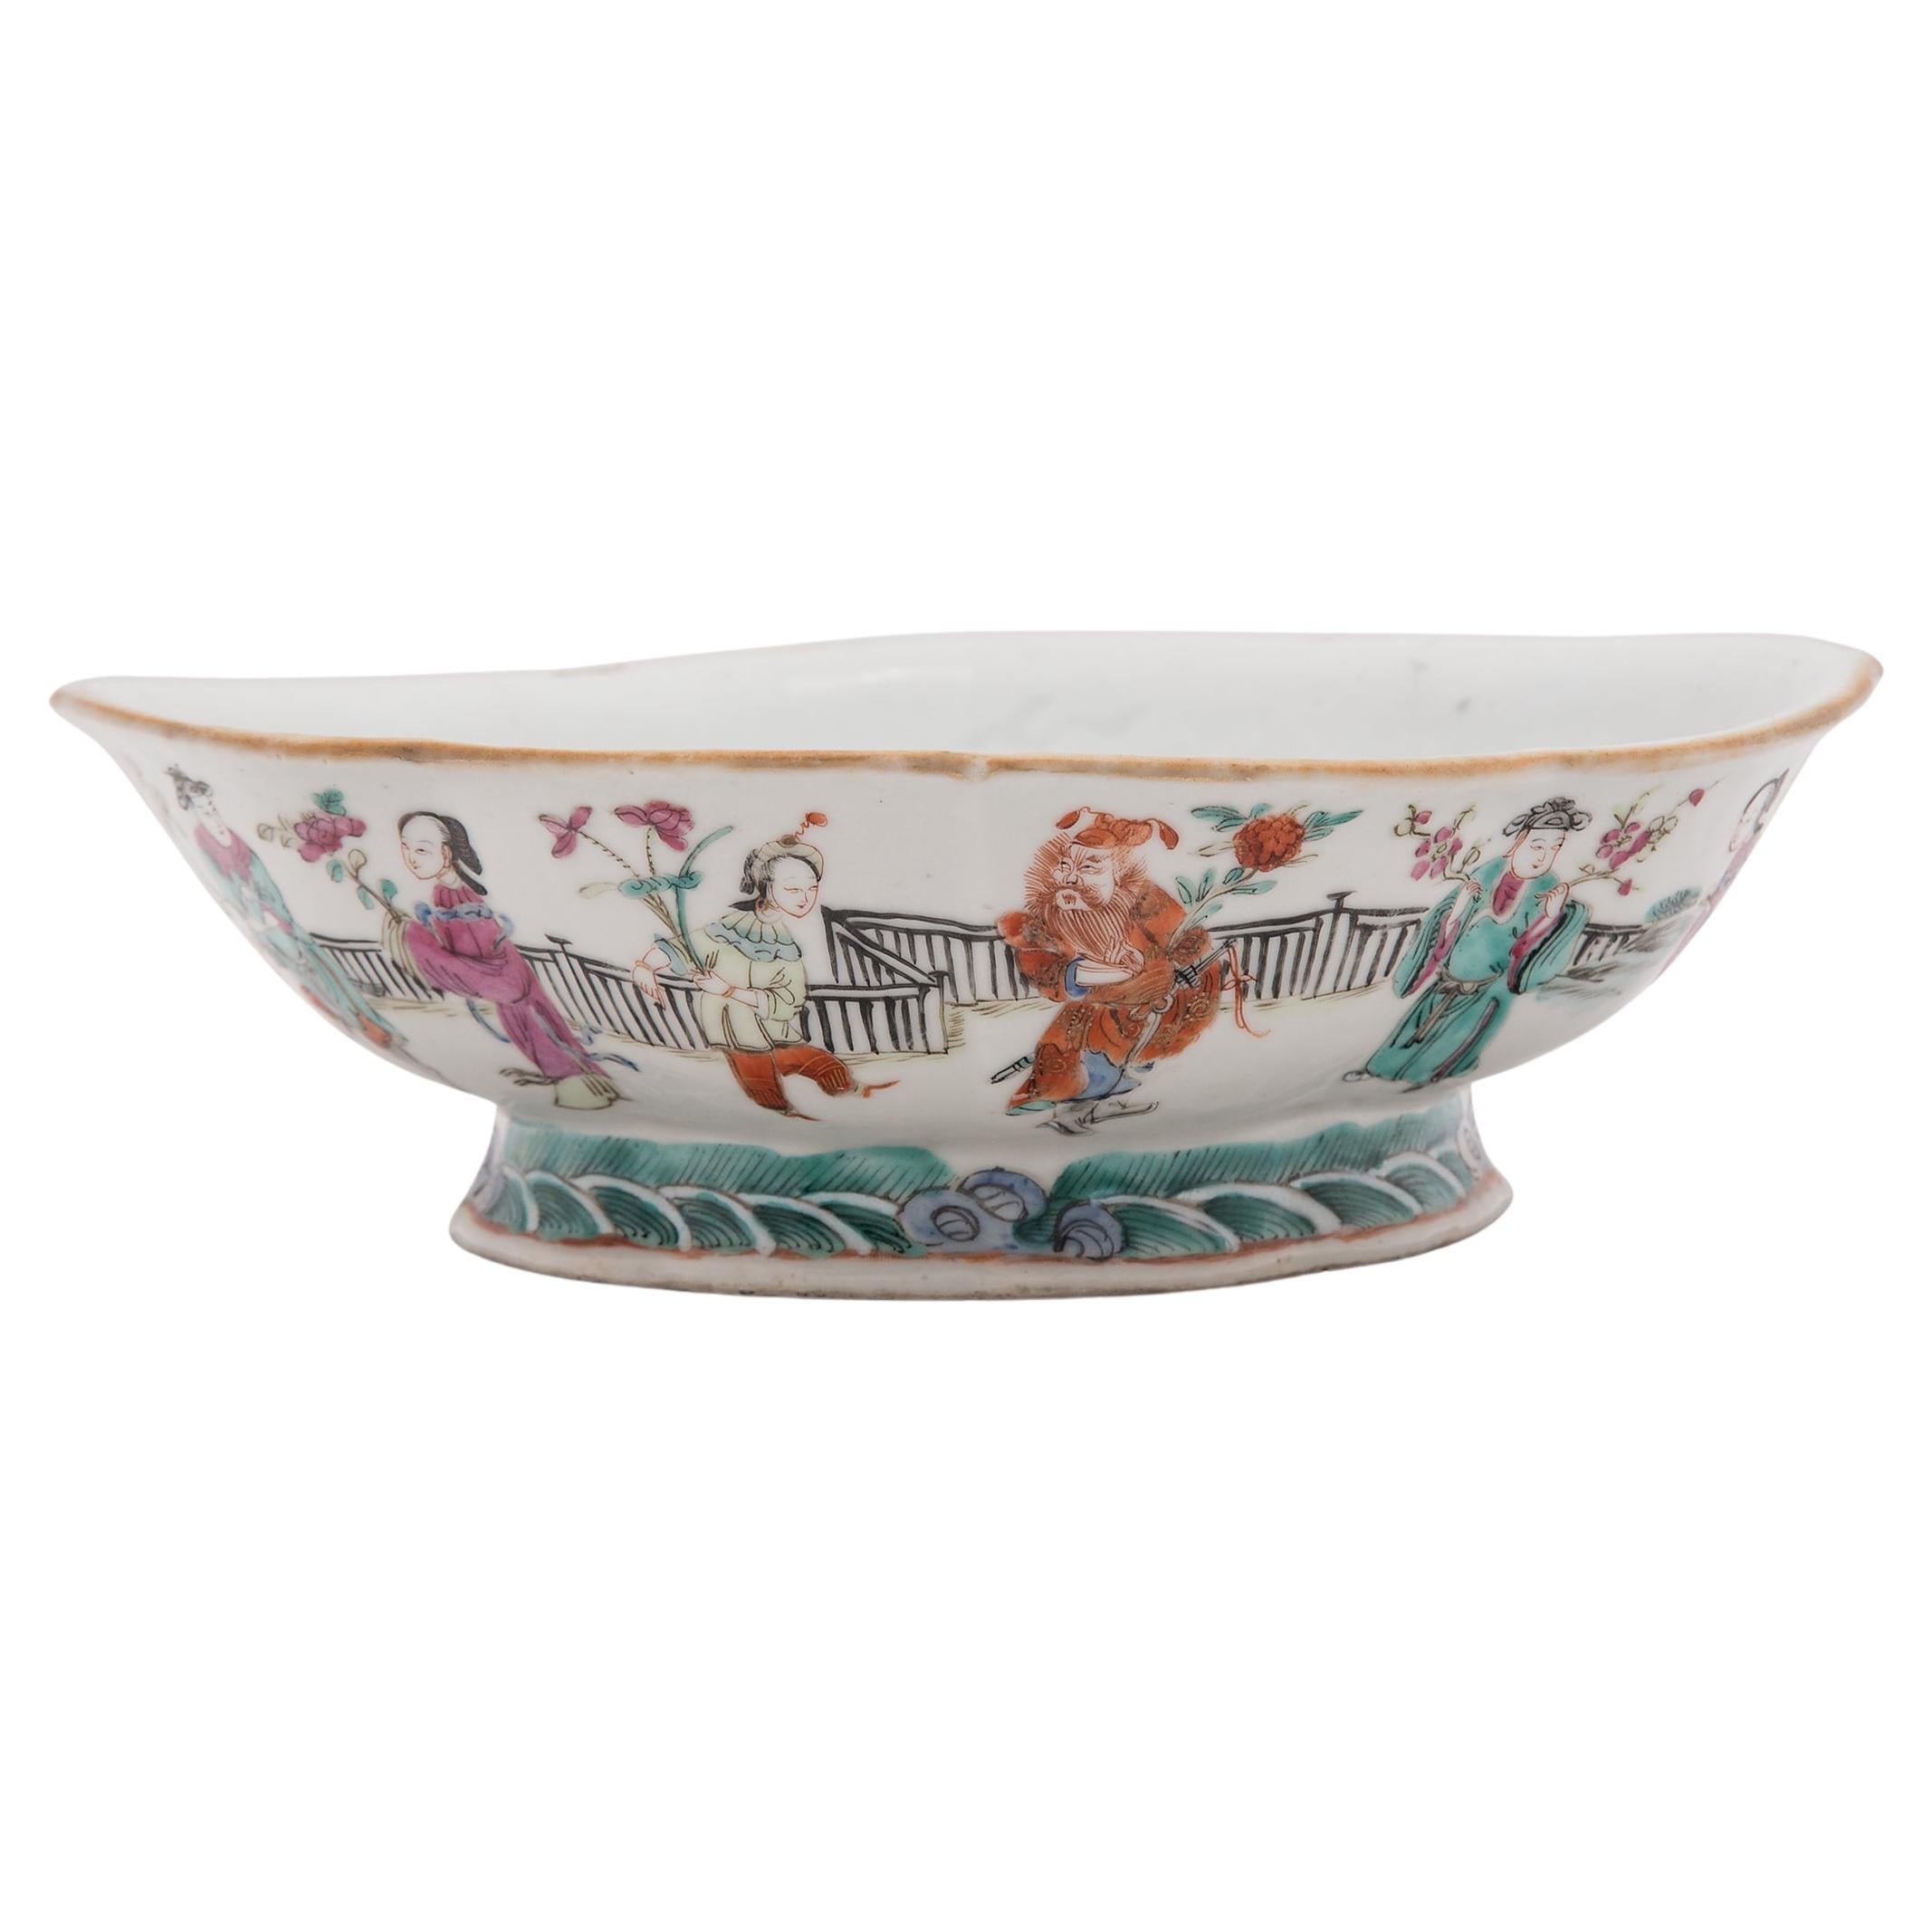 Chinese Famille Rose Footed Offering Bowl, c. 1850